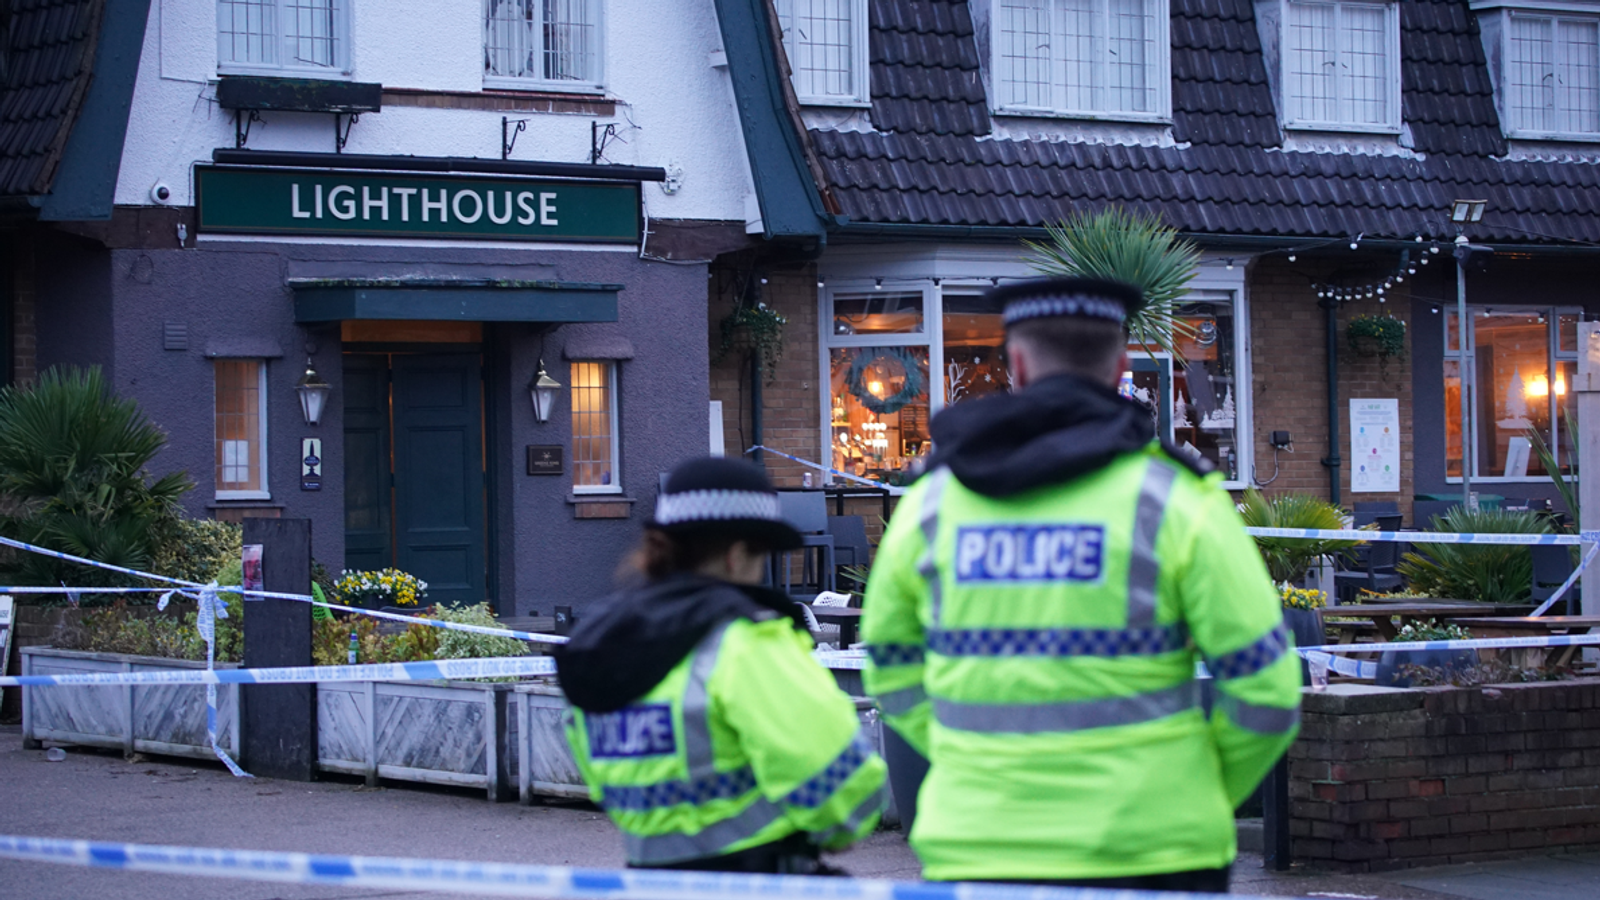 Merseyside pub shooting: Family of woman, 26, left 'devastated' and 'inconsolable' - as police hunt for gunman